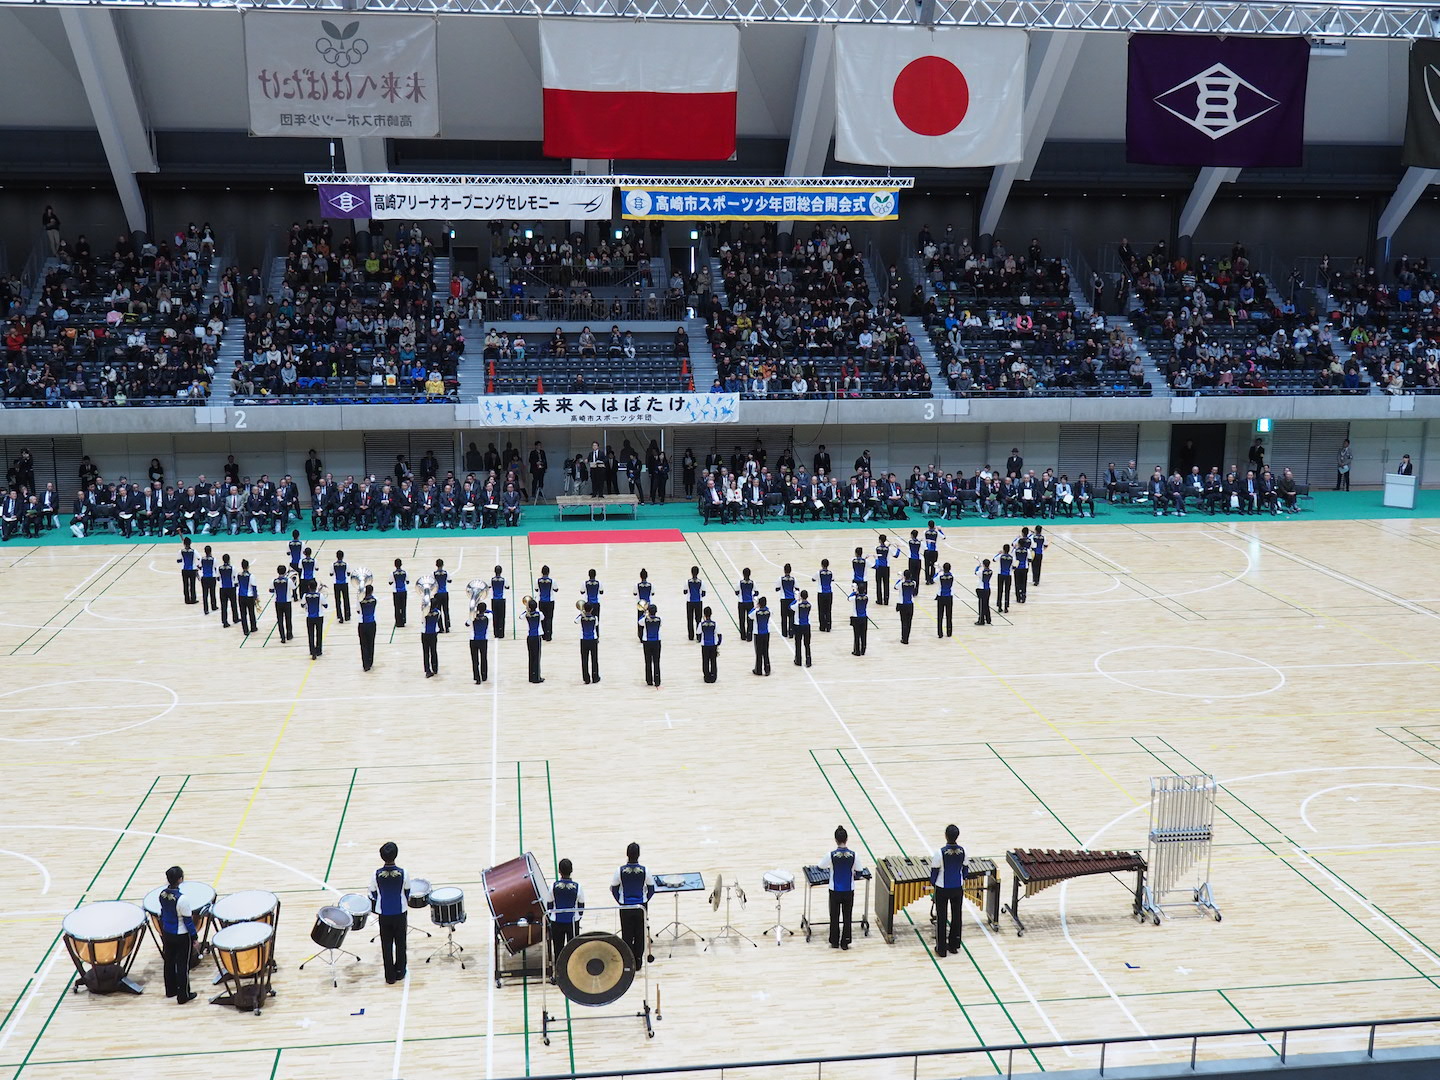 Takasaki Arena Opening Ceremony<br />Performed by<br />The Tsukasawa Junior High School Marching Band 4